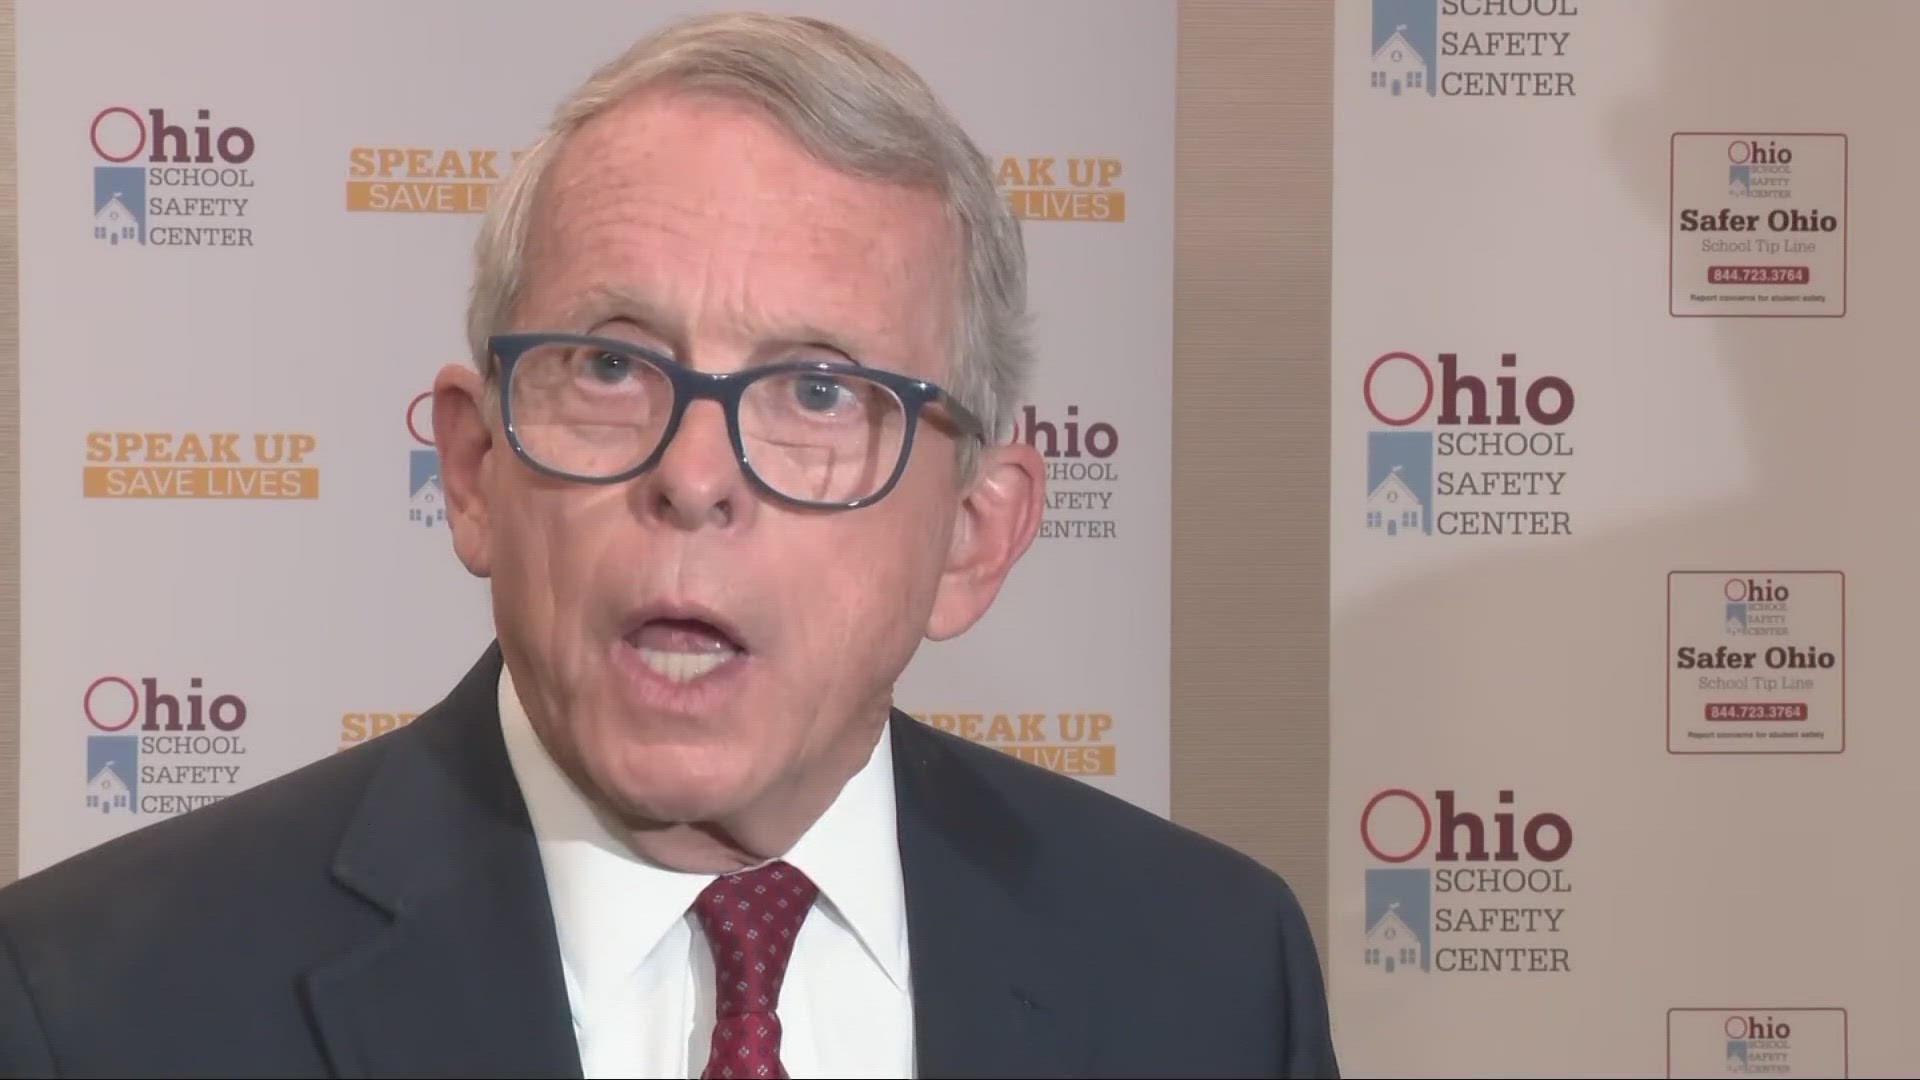 DeWine said he does not blame anybody for Circleville, however, he said it’s on public officials to ensure that officers have enough training.